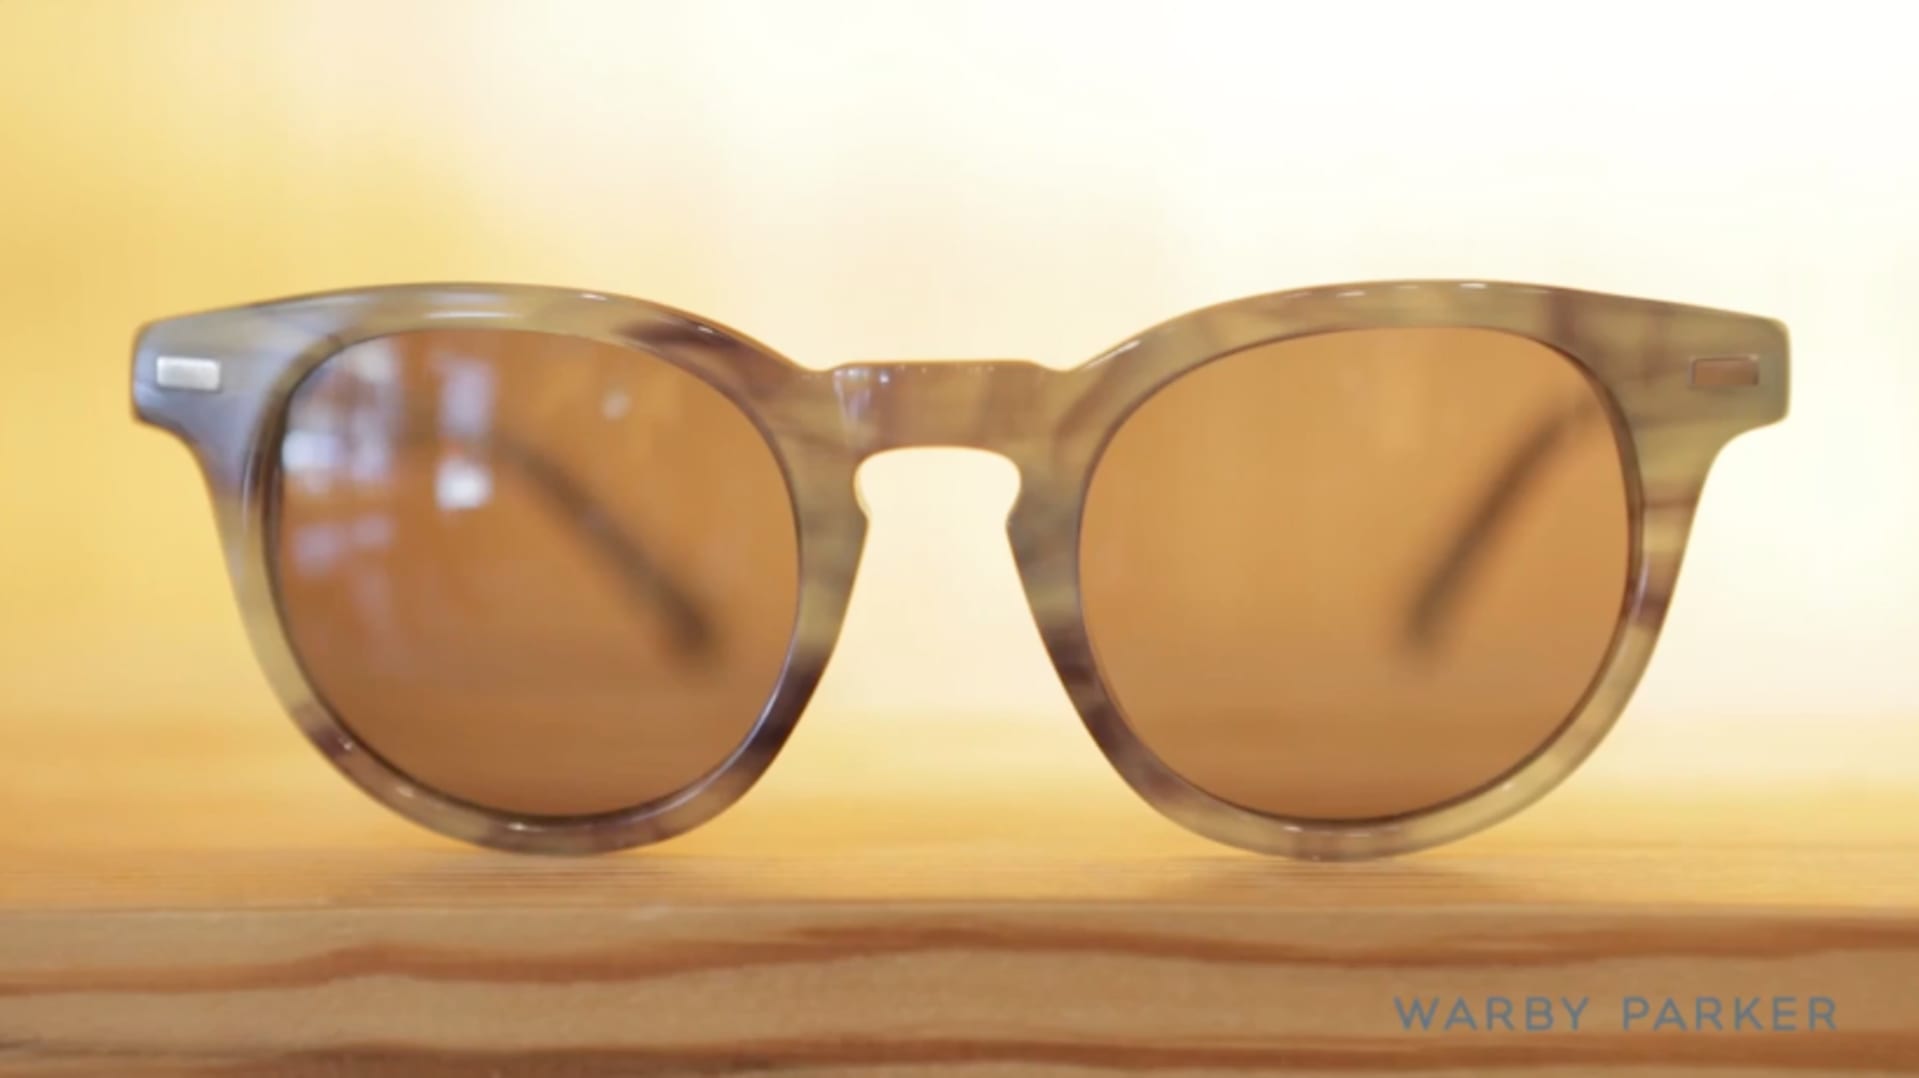 How The Founder Of Eyewear Brand Warby Parker Had The Vision To Become An Entrepreneur